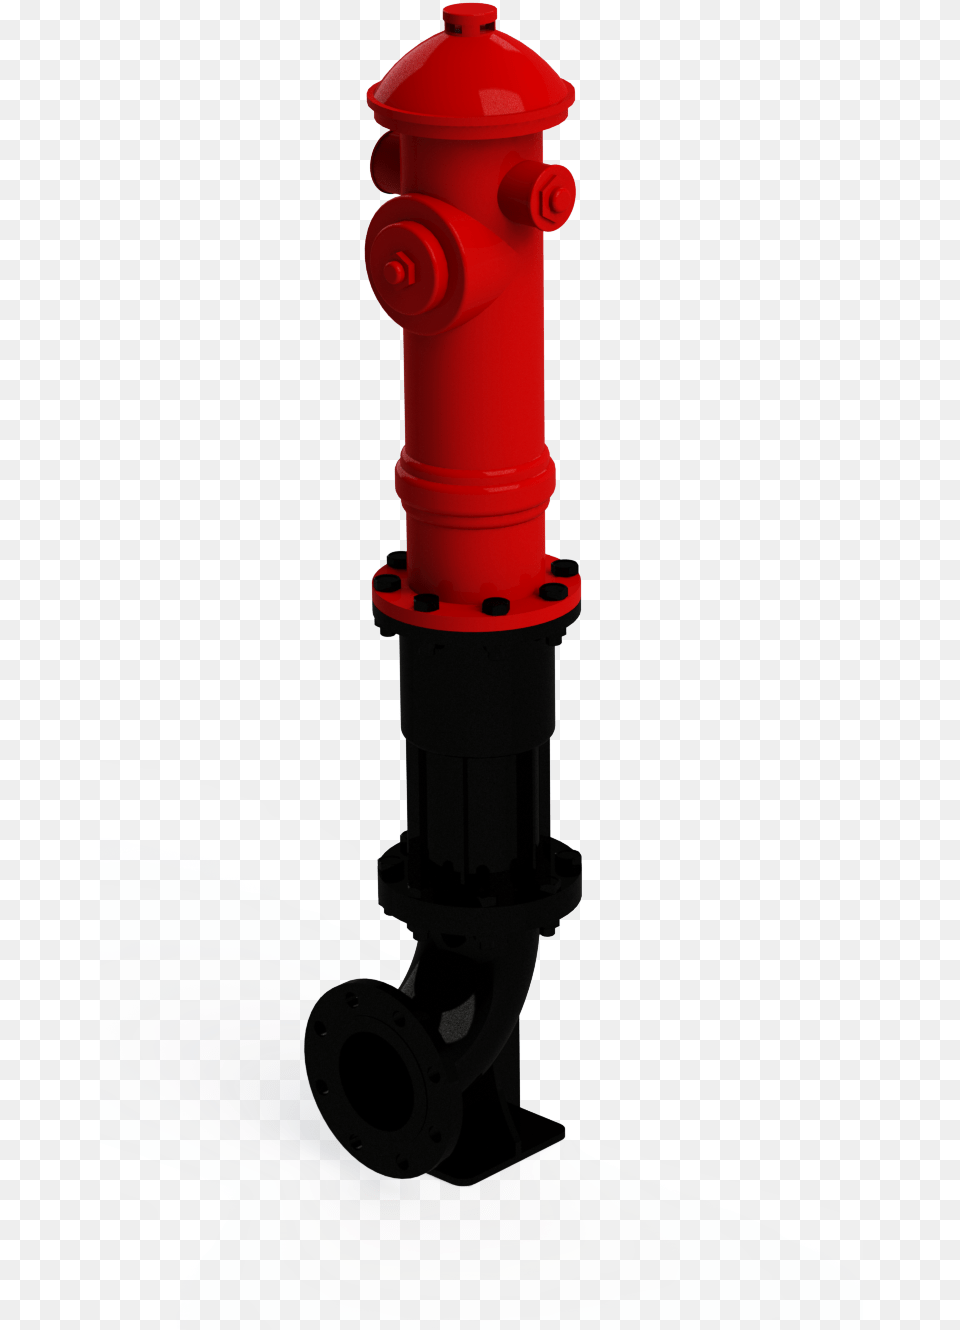 Standard Fire Hydrants Firex Piller Hydrants, Fire Hydrant, Hydrant Free Png Download